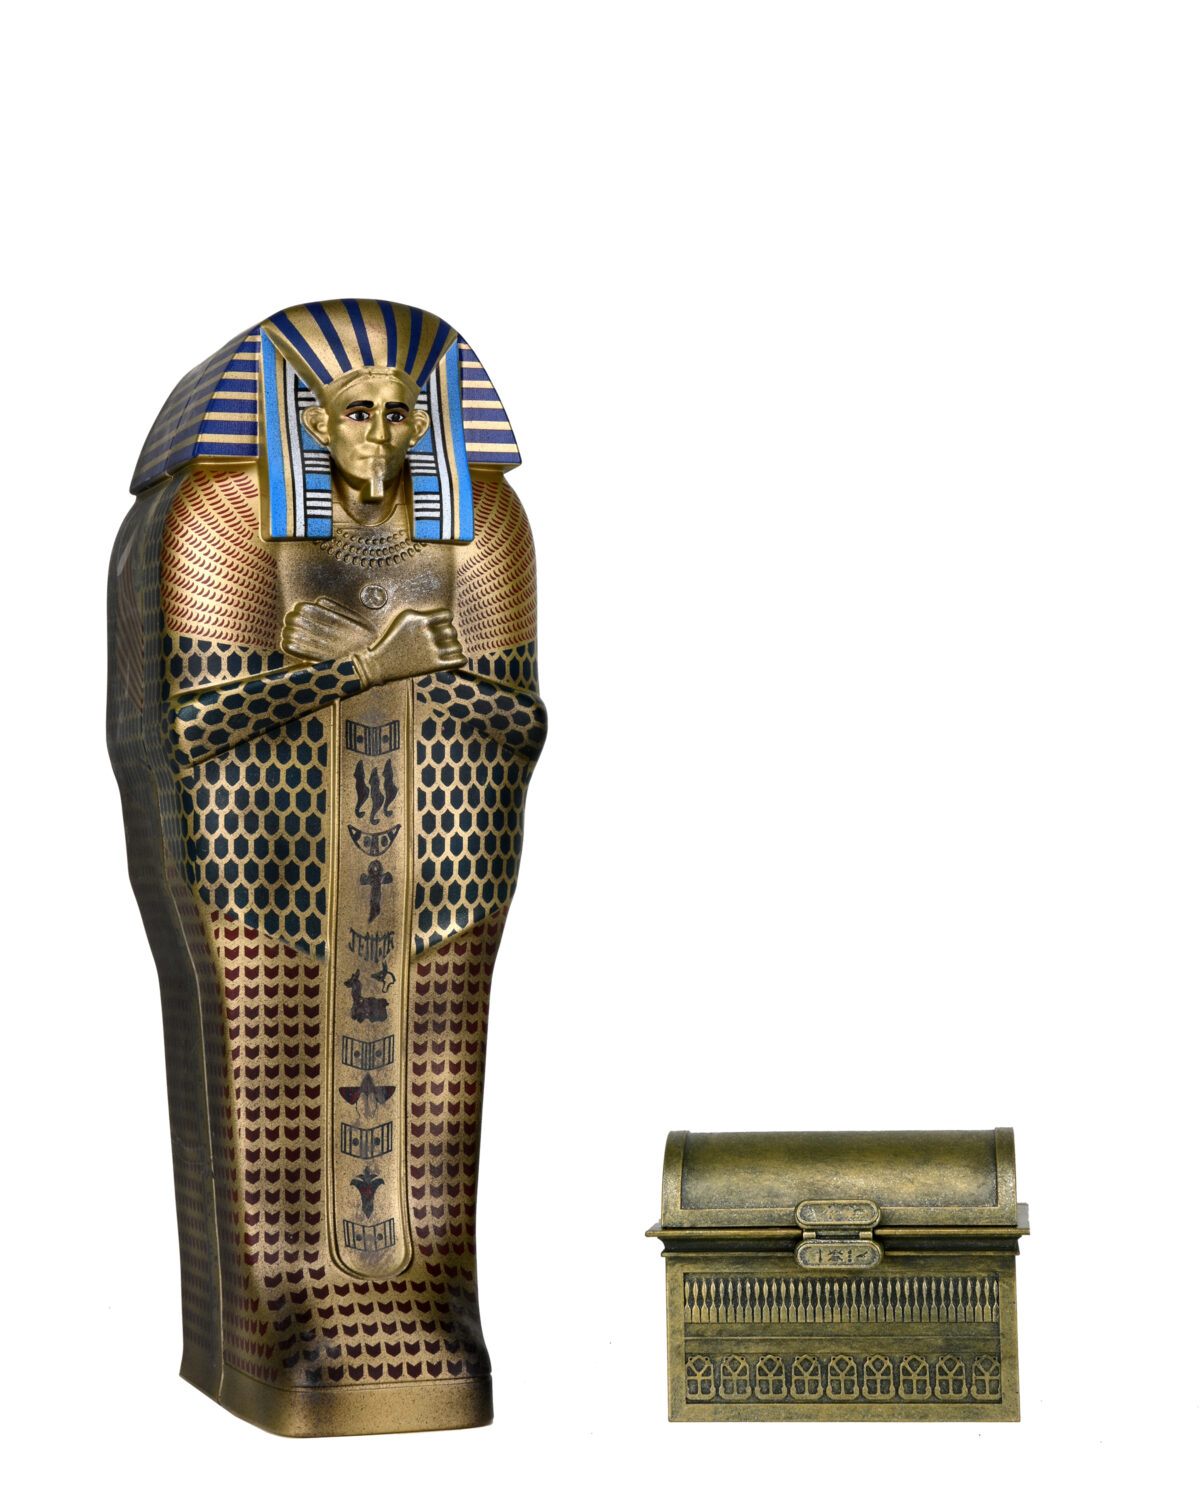 Universal Monsters
Accessory Pack – The Mummy.